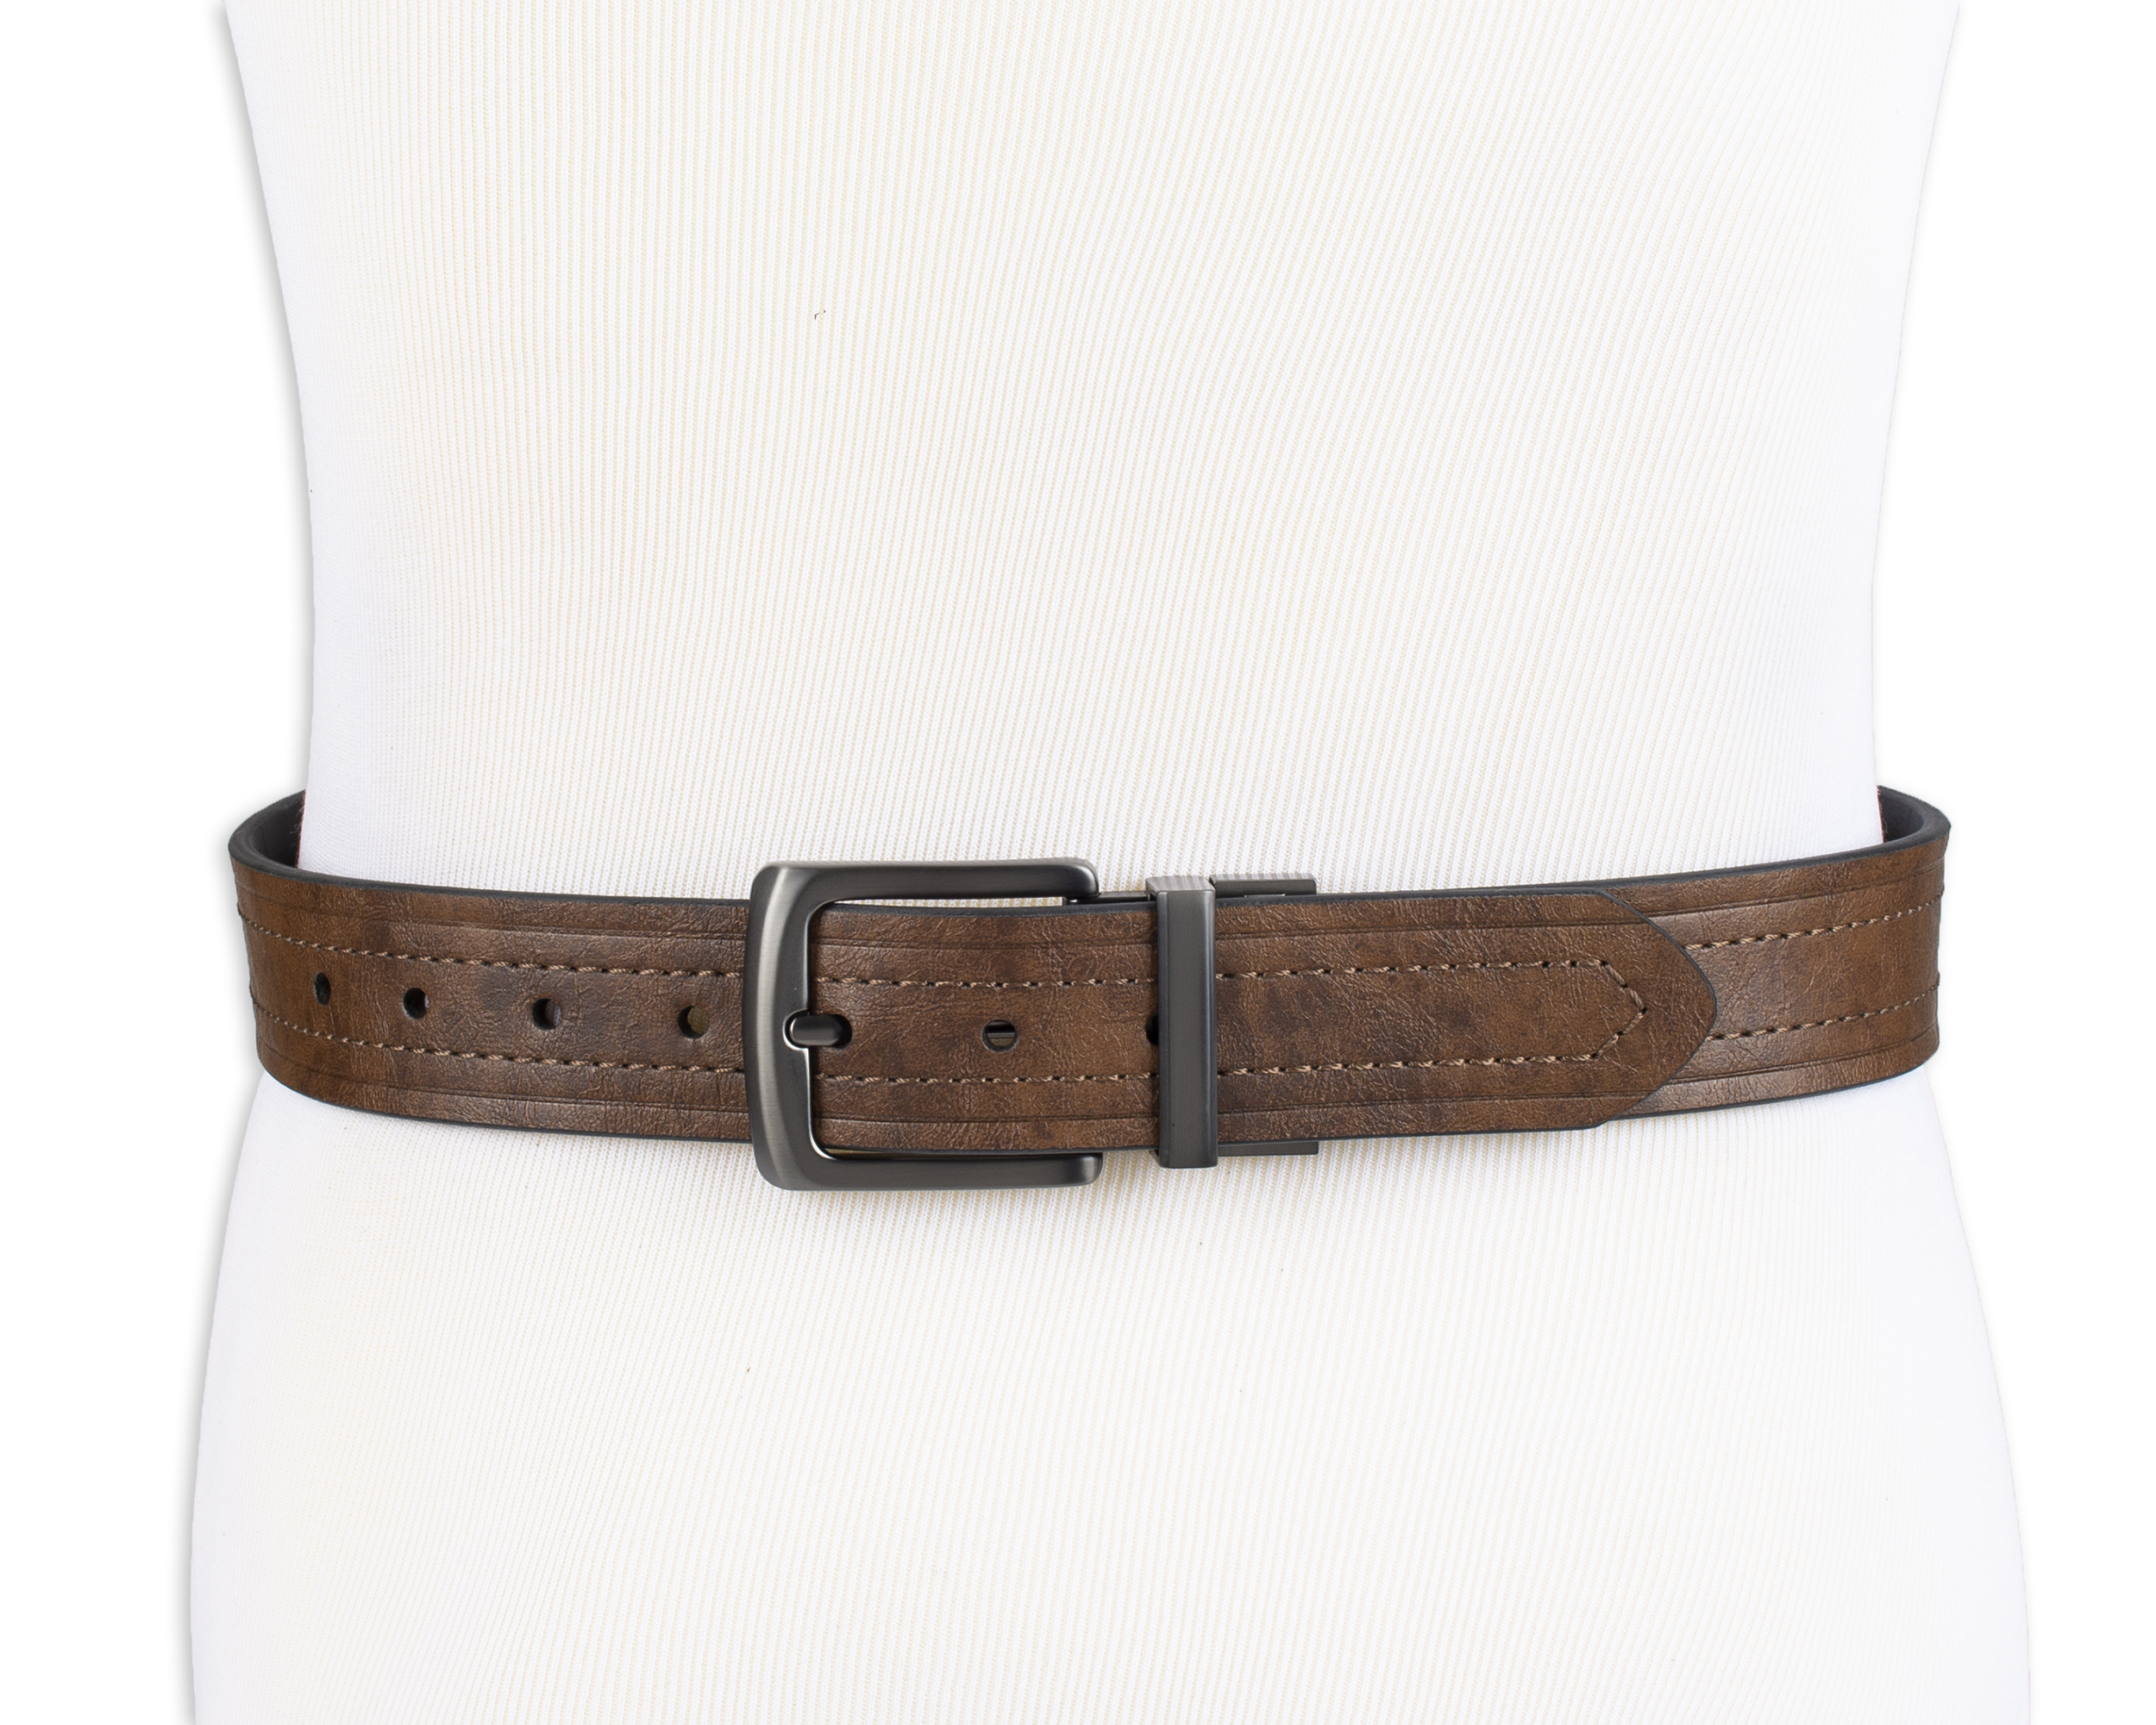 Levi's Men's Two-in-One Reversible Casual Belt, Brown/Black - image 5 of 8